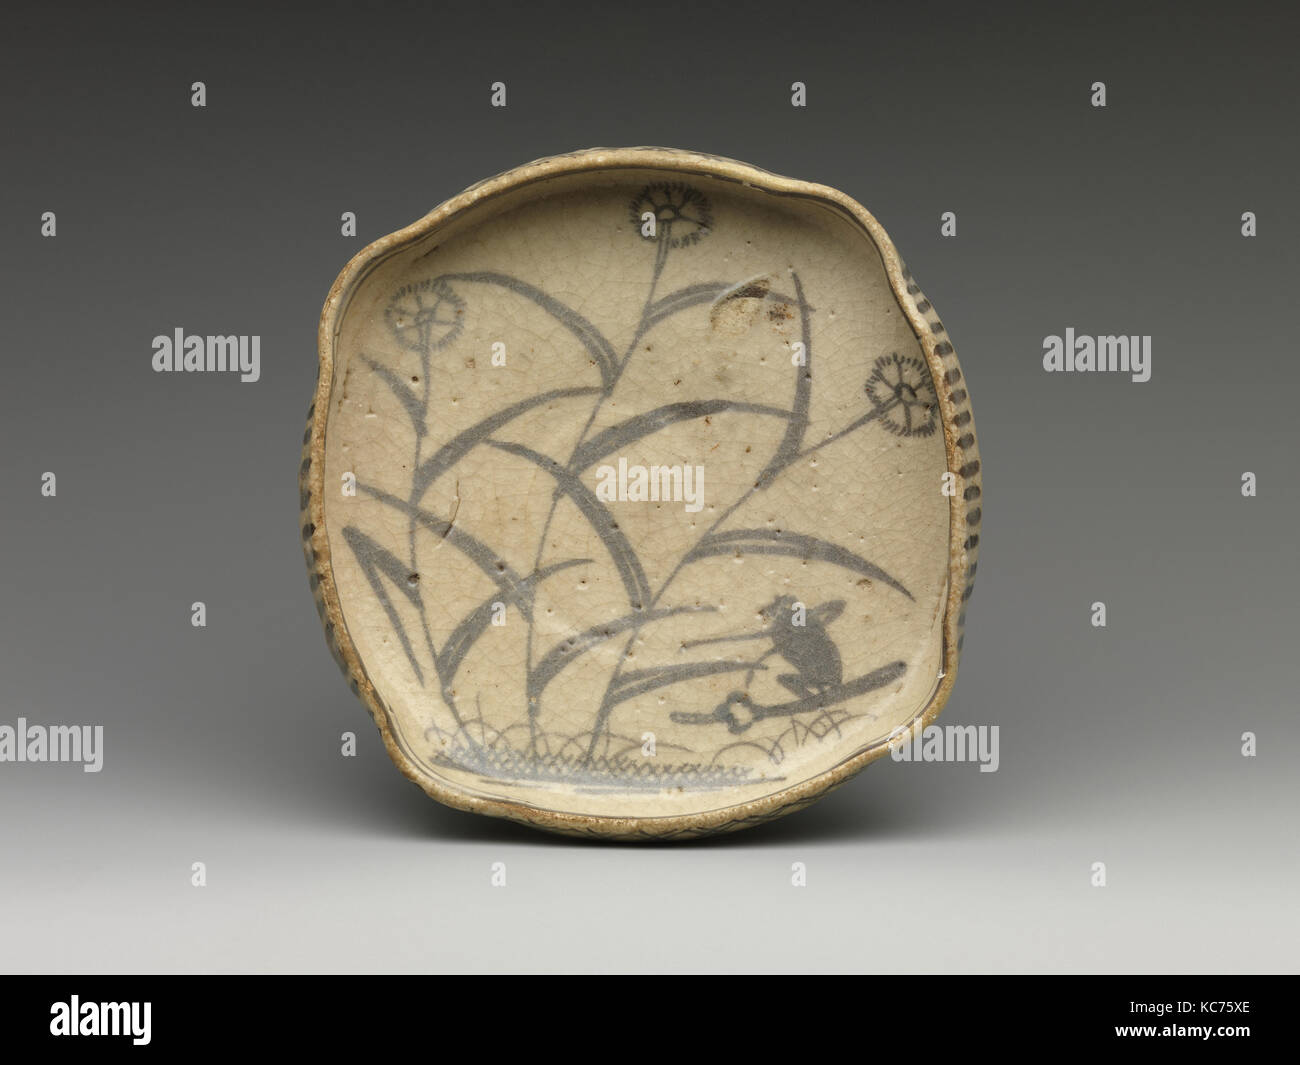 Dish with Bird-and-Flower Design, early 17th century Stock Photo